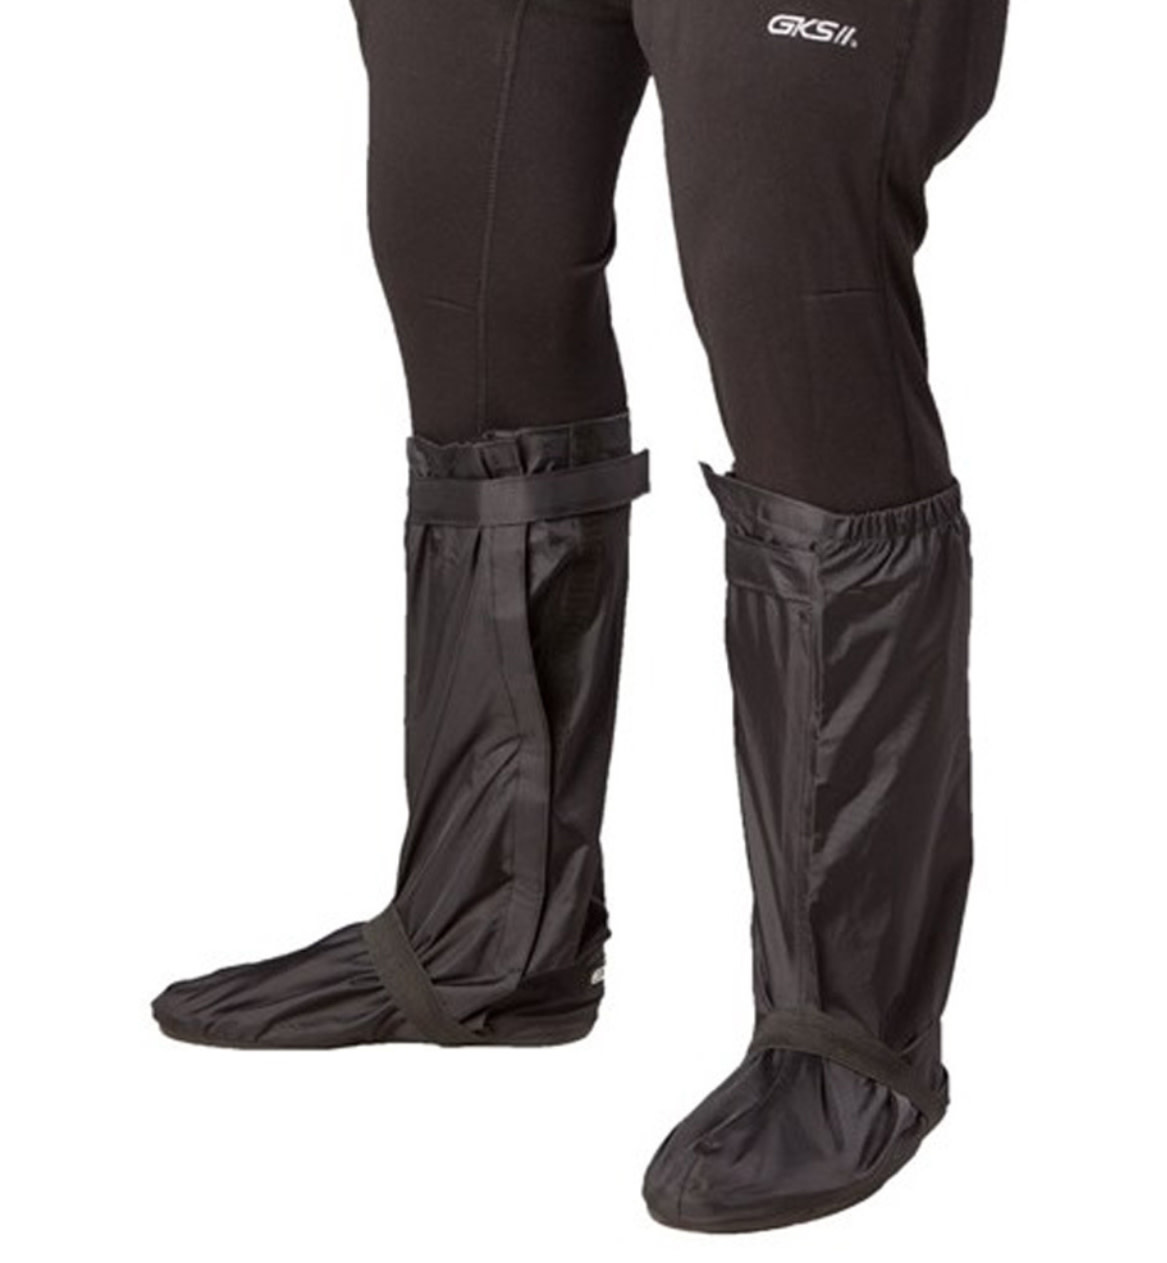 GKS Motorcycle Waterproof Boot Covers 60-BOOT-NY 2XL - Big Valley Sales